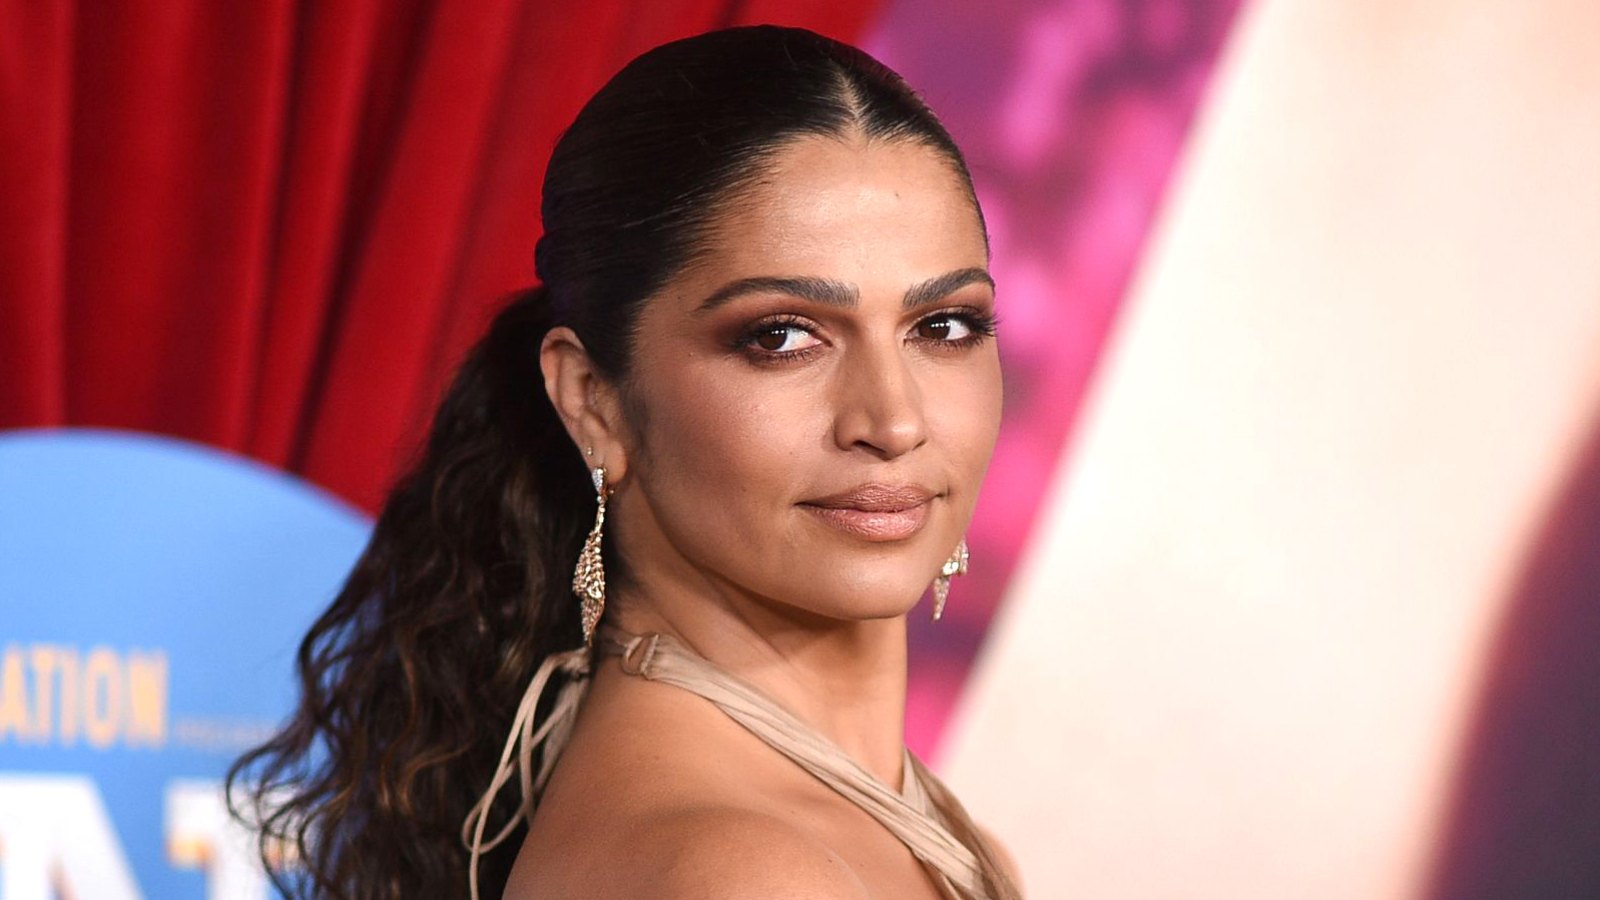 Camila Alves McConaughey: 25 Things You Don’t Know About Me ('My Secret Talent is Making Flower Arrangements')